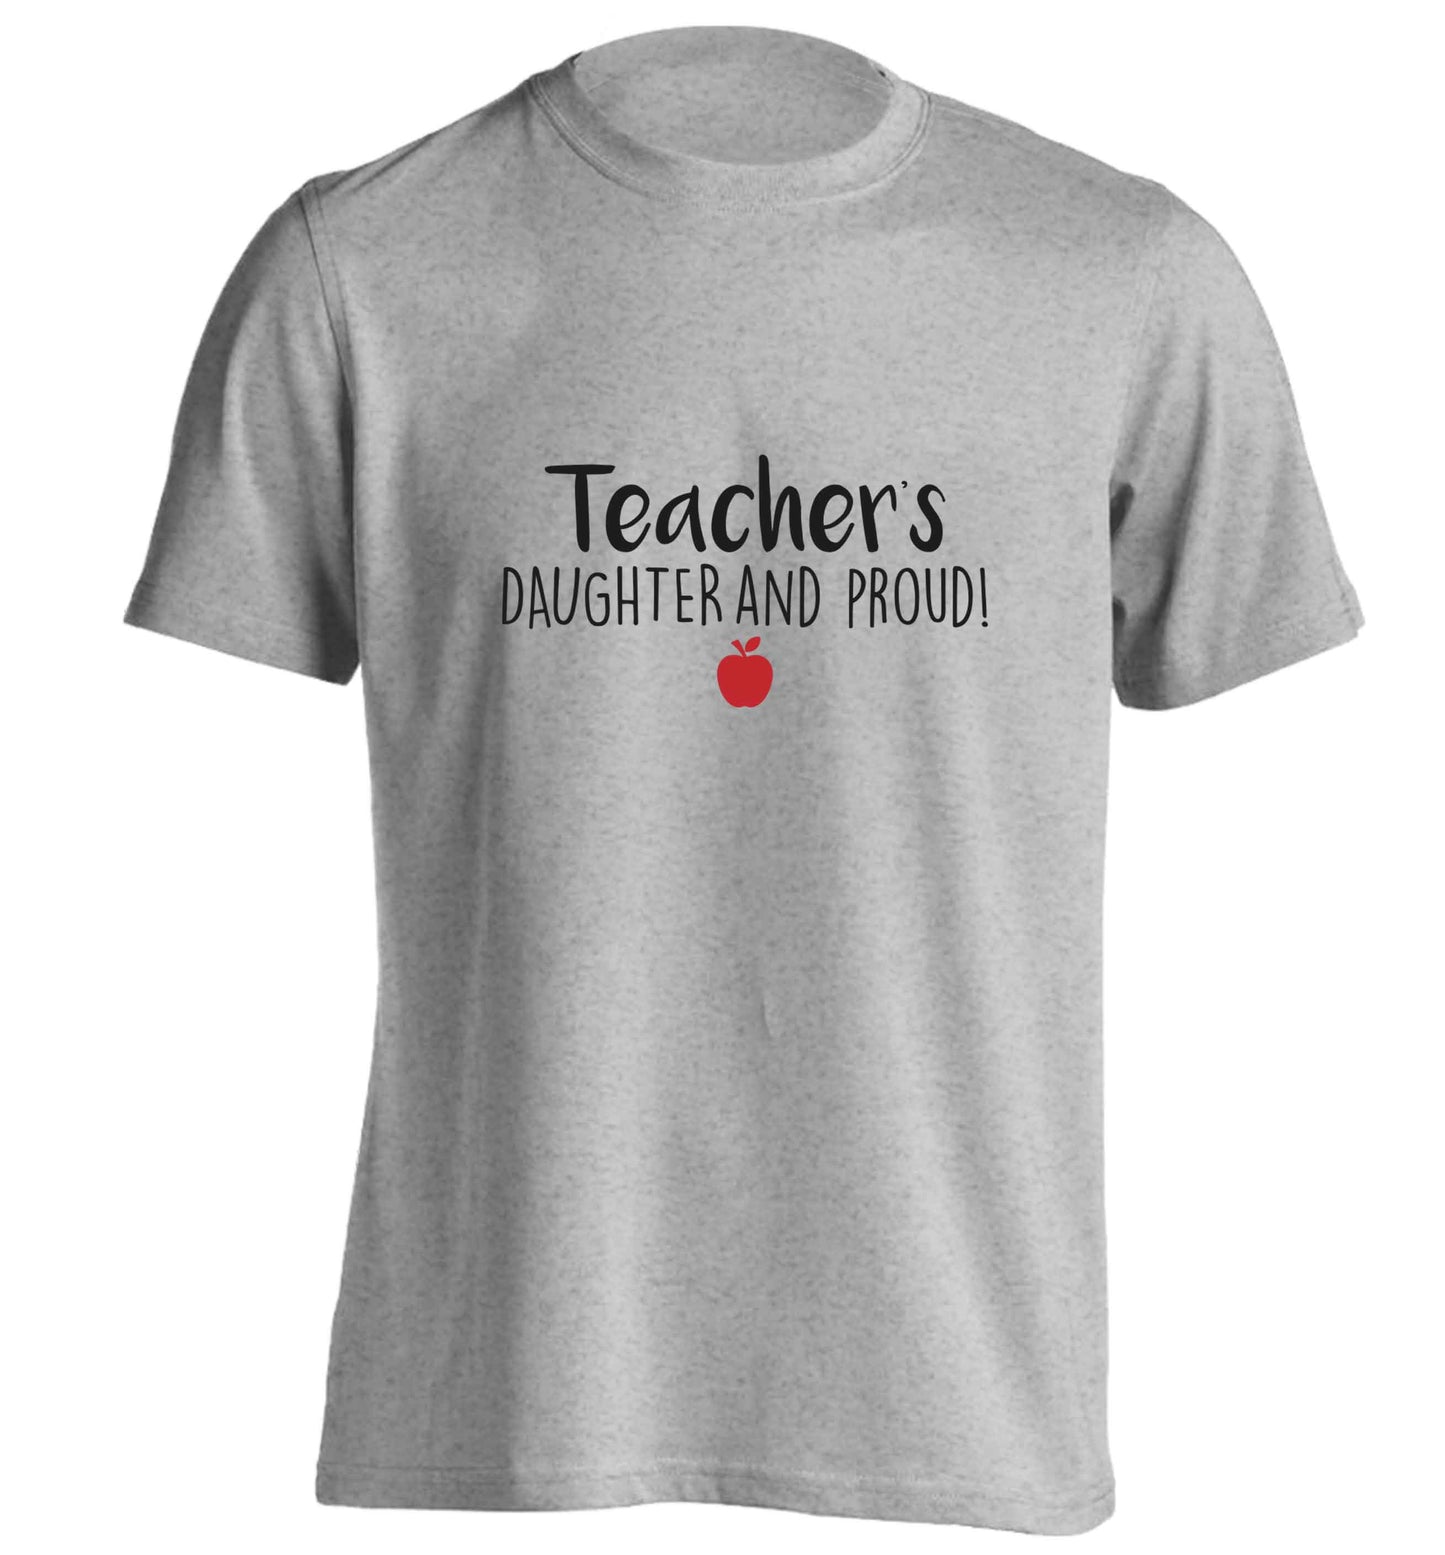 Teachers daughter and proud adults unisex grey Tshirt 2XL